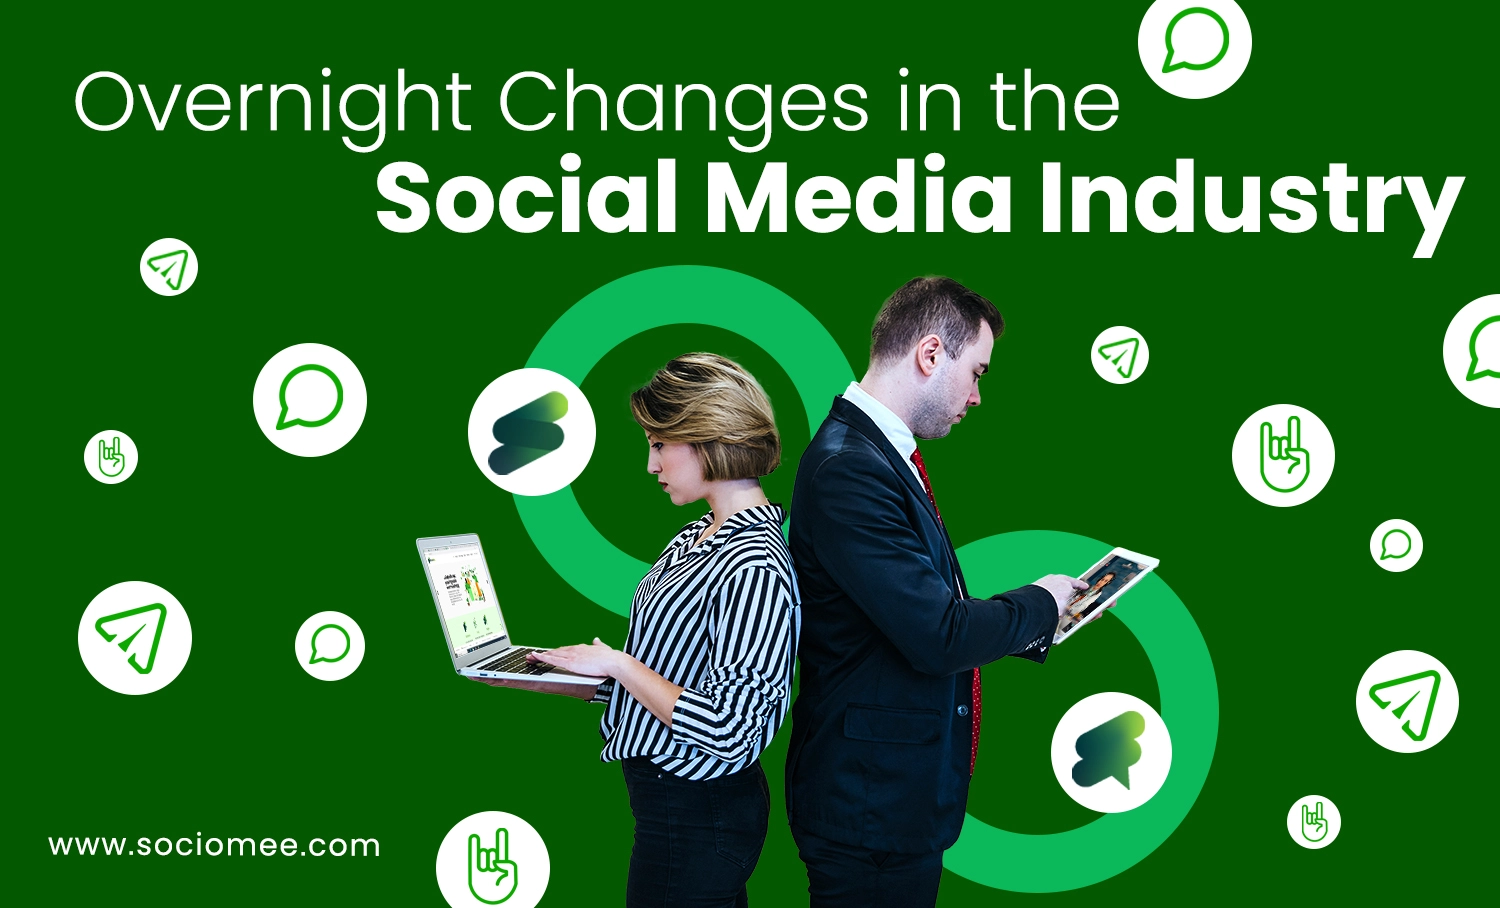 How To Prevent Overnight Changes in the Social Media Industry?